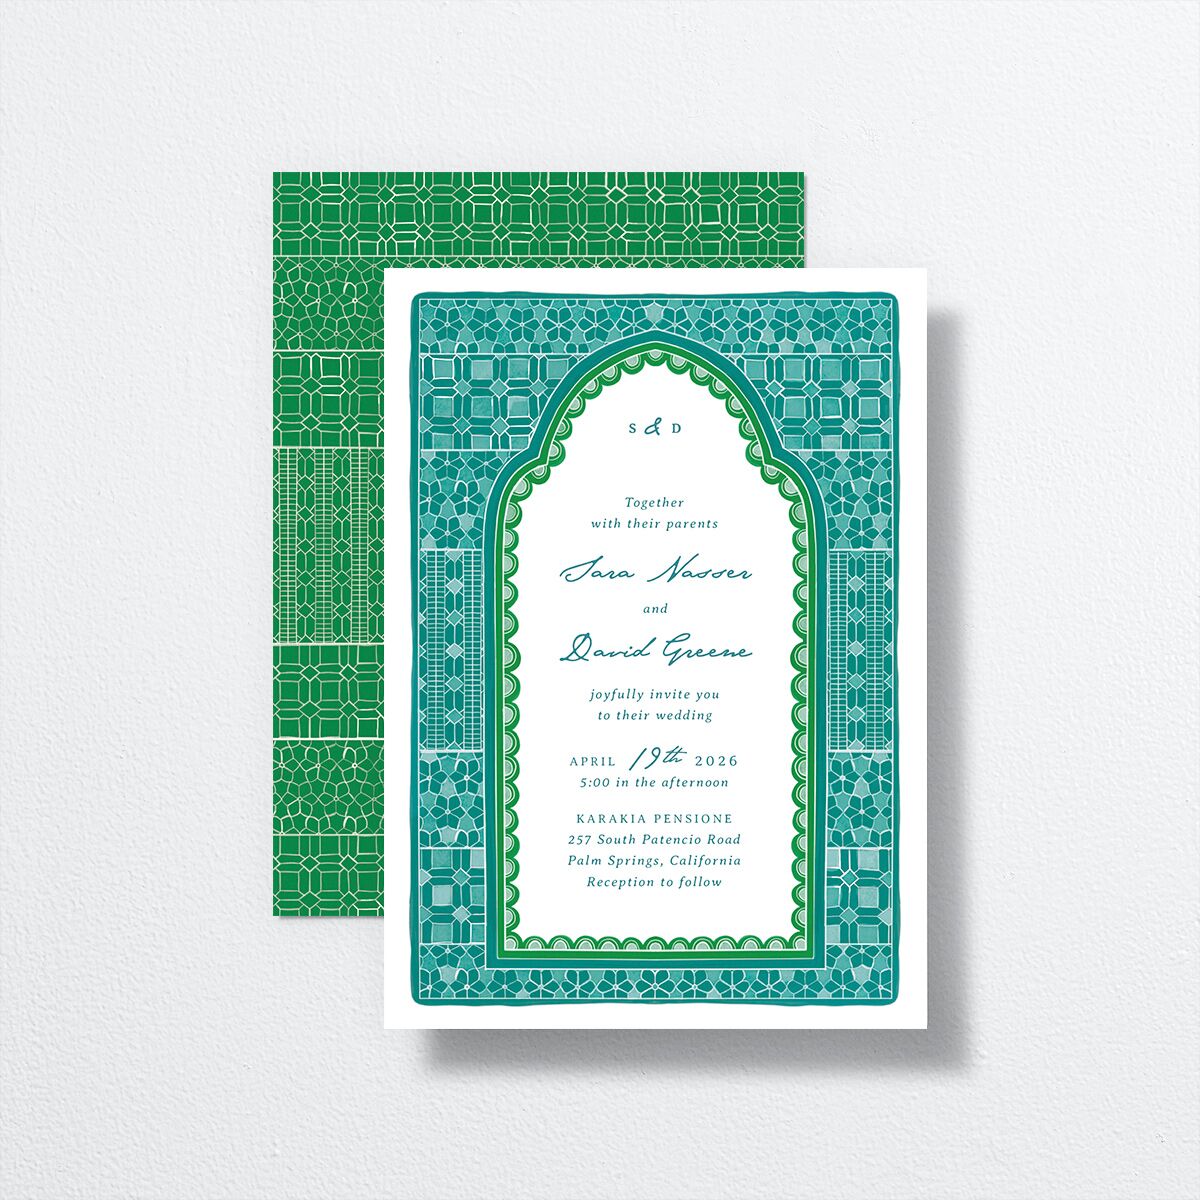 Marrakesh Tile Wedding Invitations front-and-back in teal